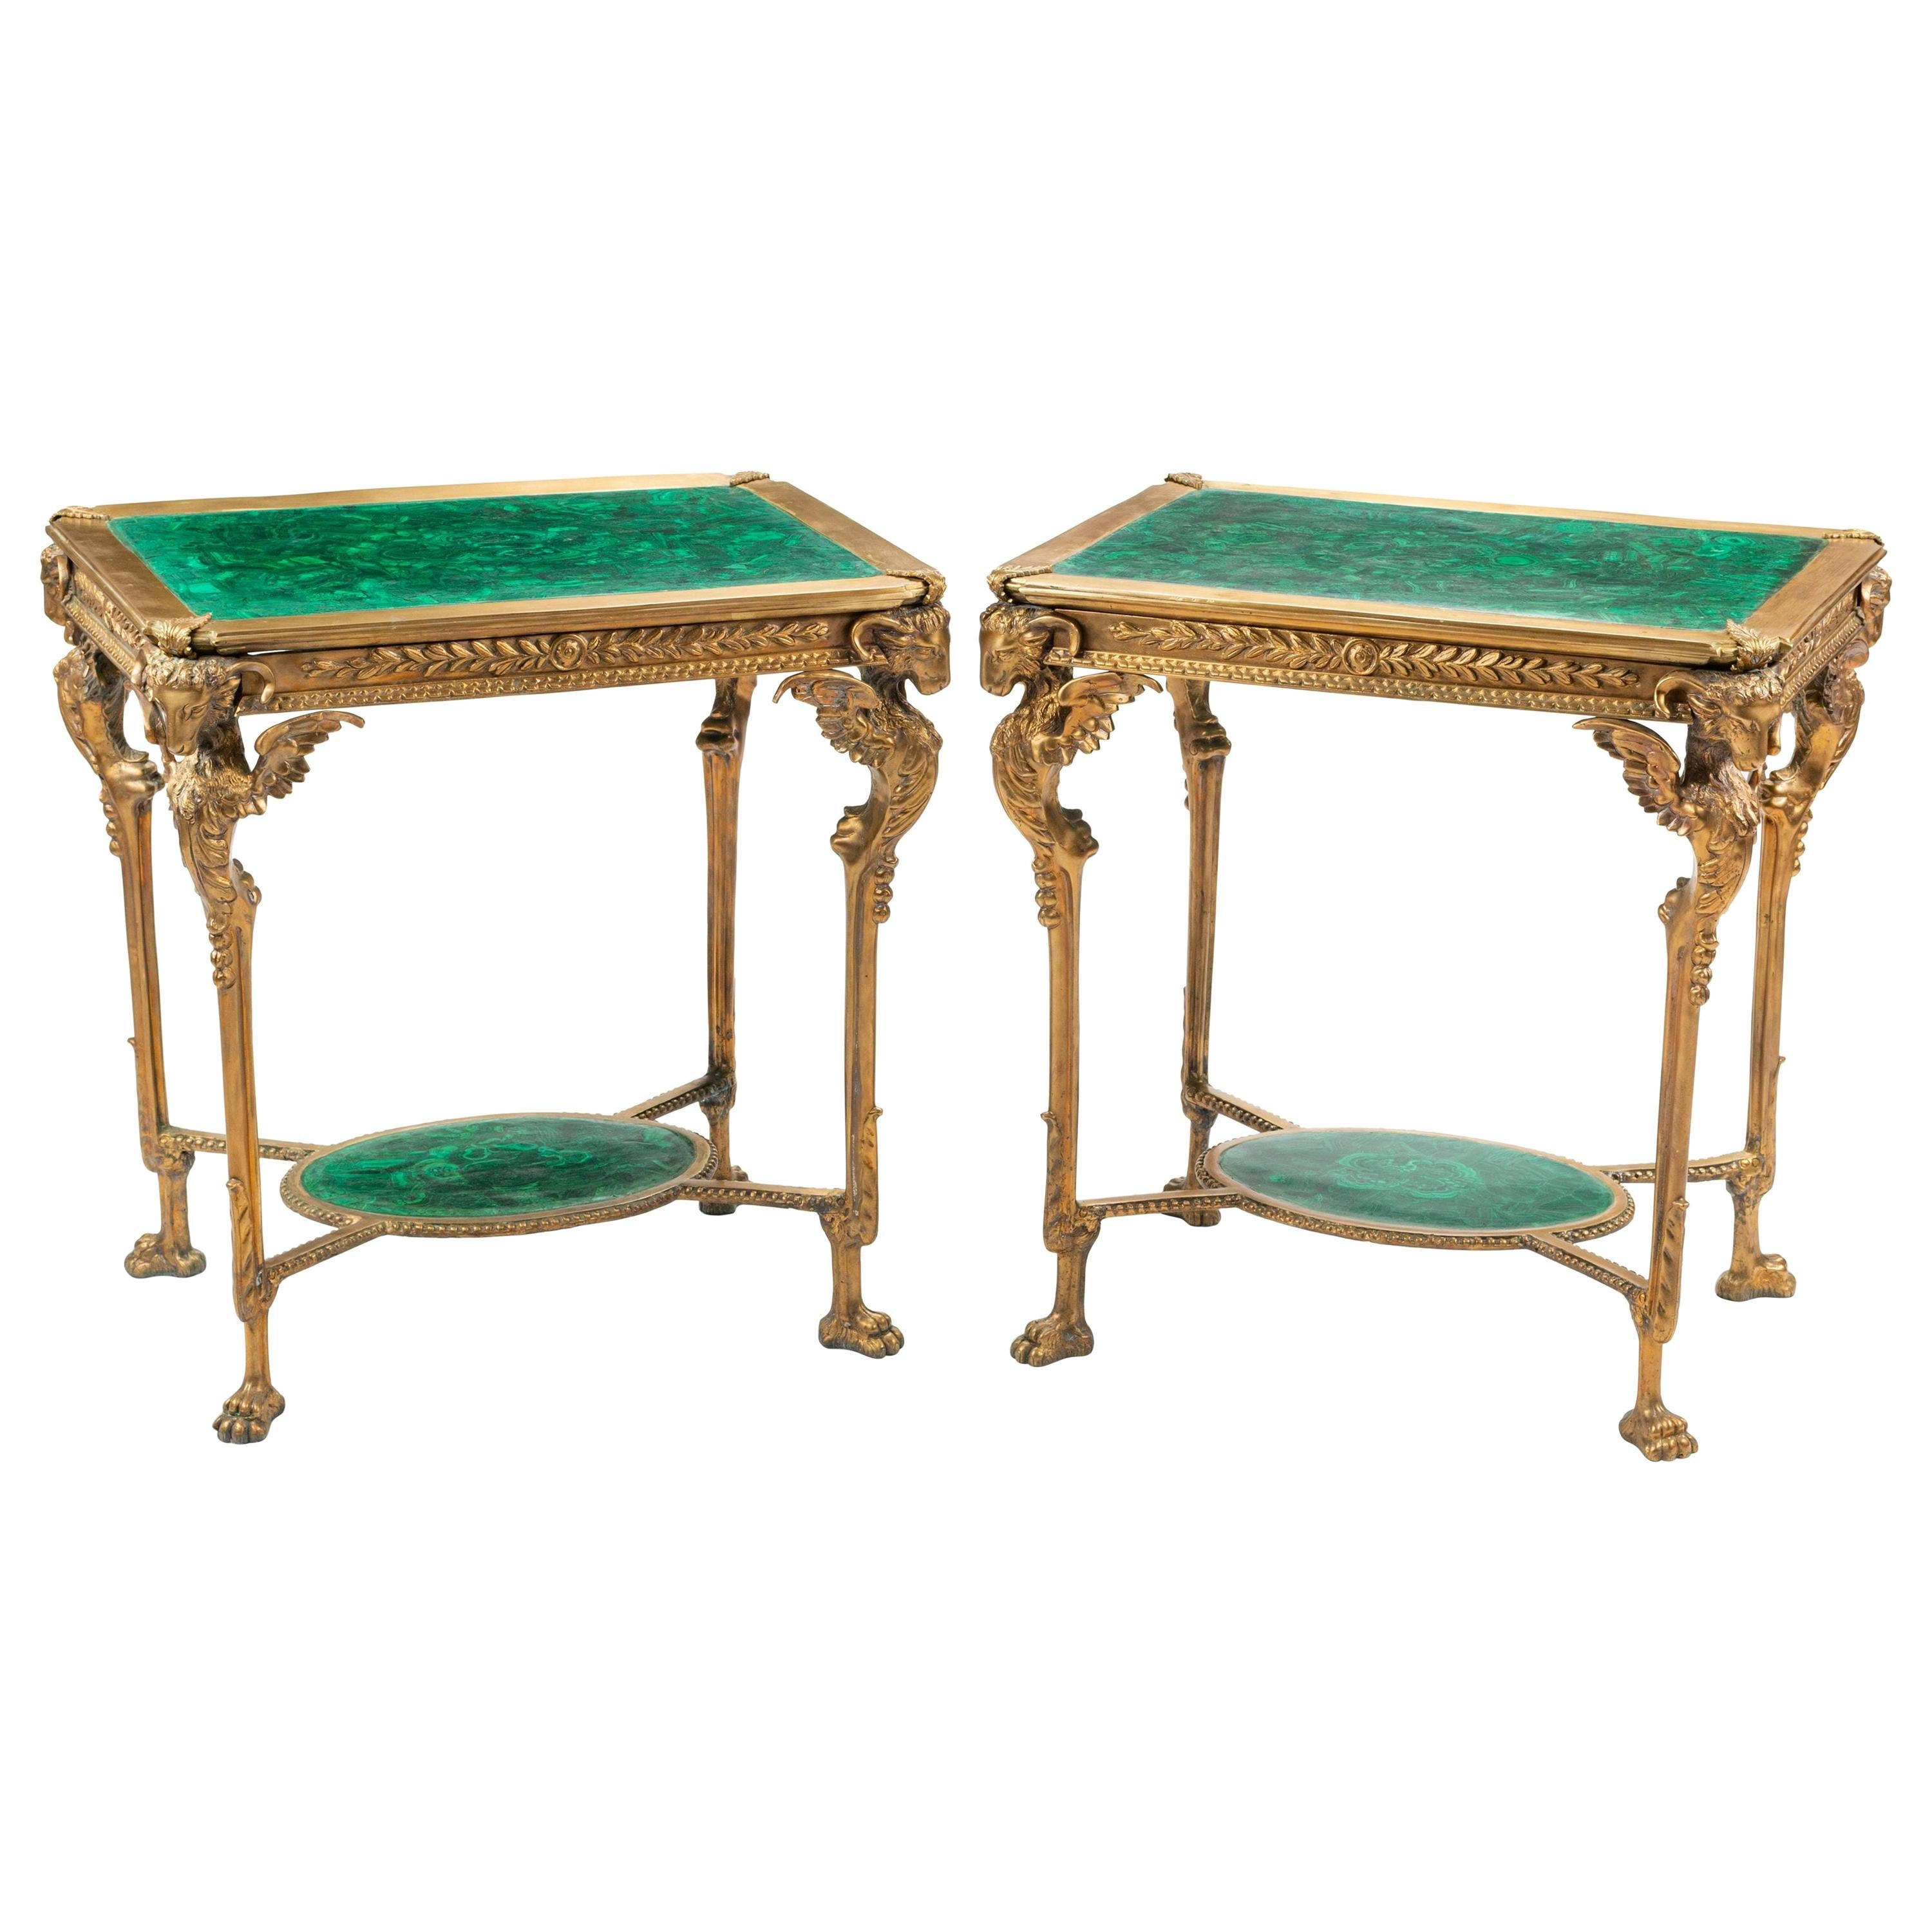 Early 20th Century Empire Malachite and Gilt Bronze Tables